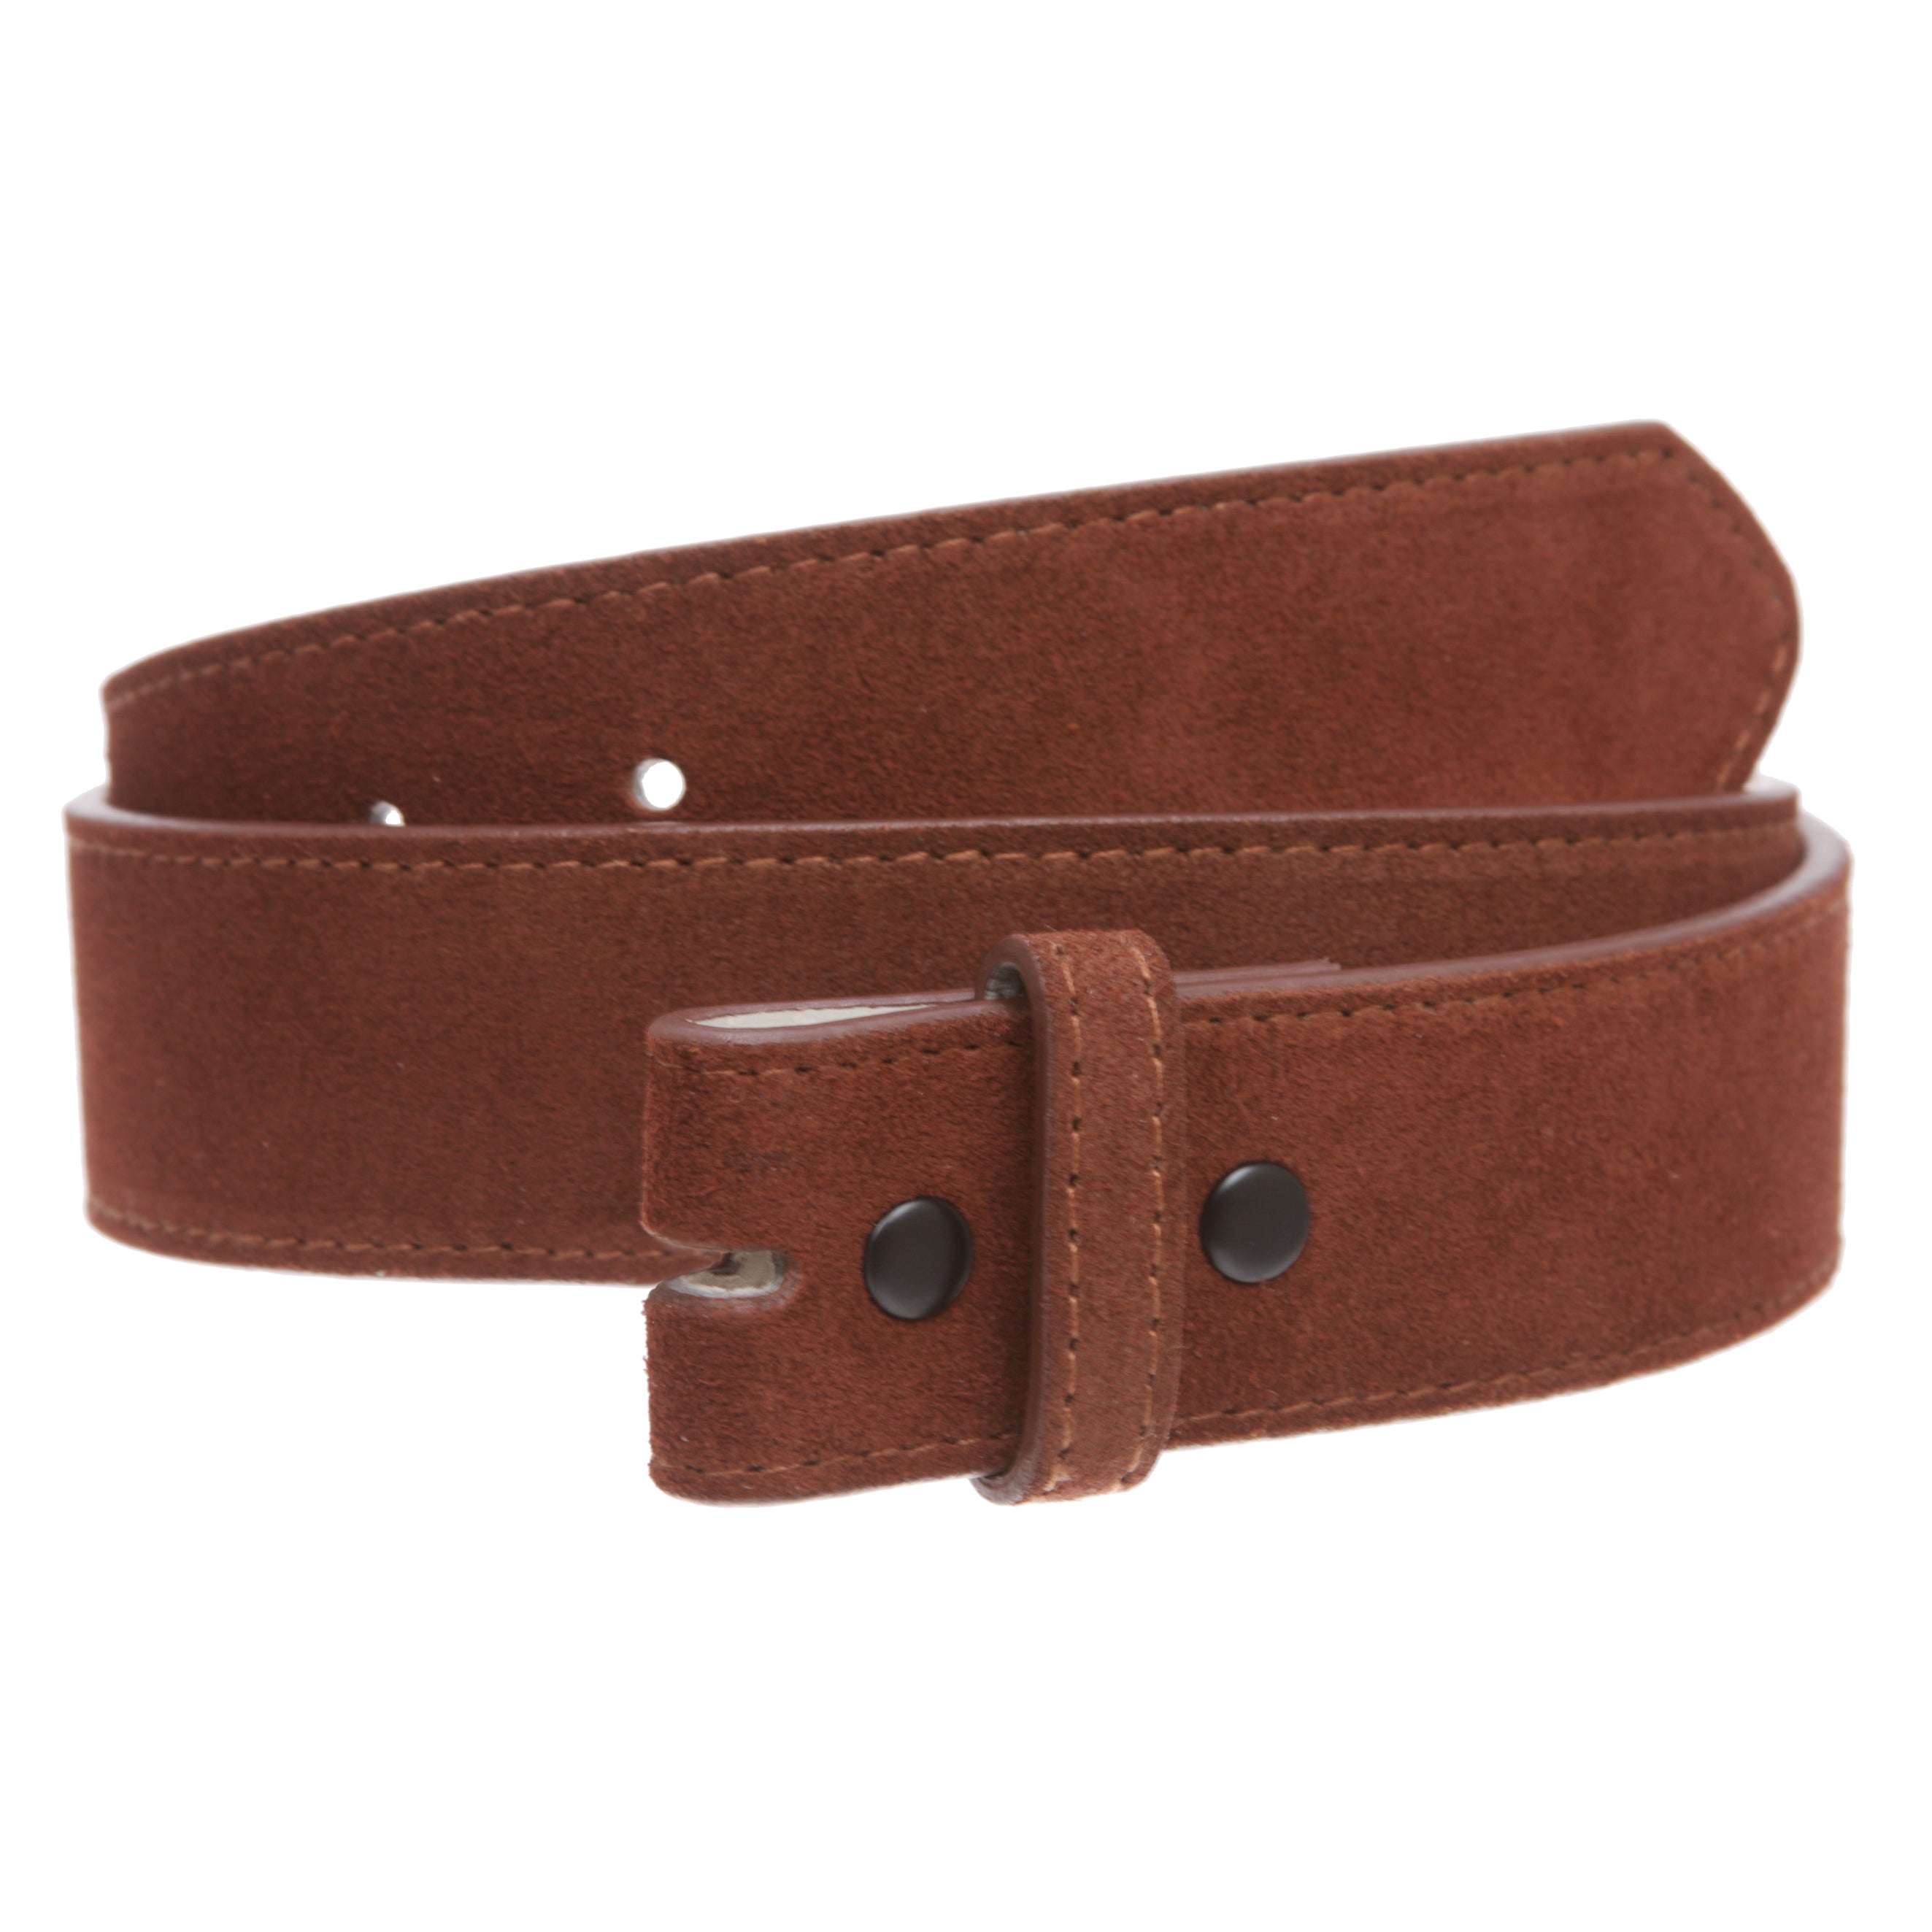 1 1/2" Snap On Suede Leather Belt Strap